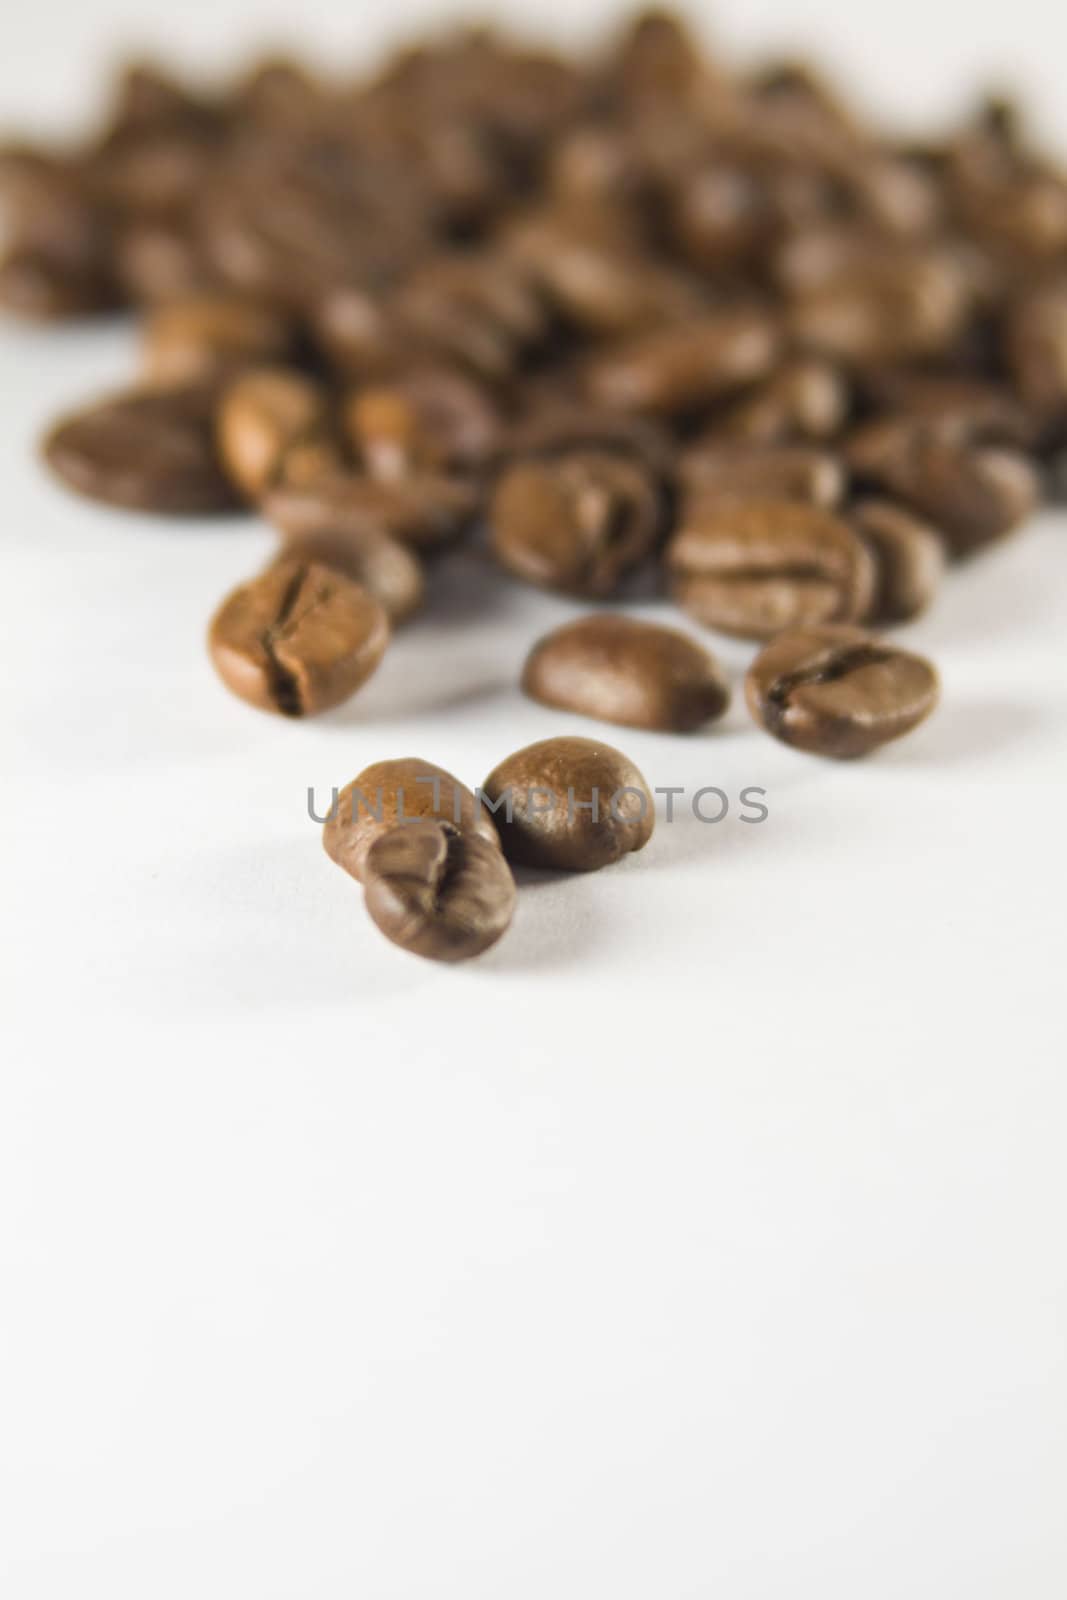 Coffee Beans close-up, small depth of sharpness.